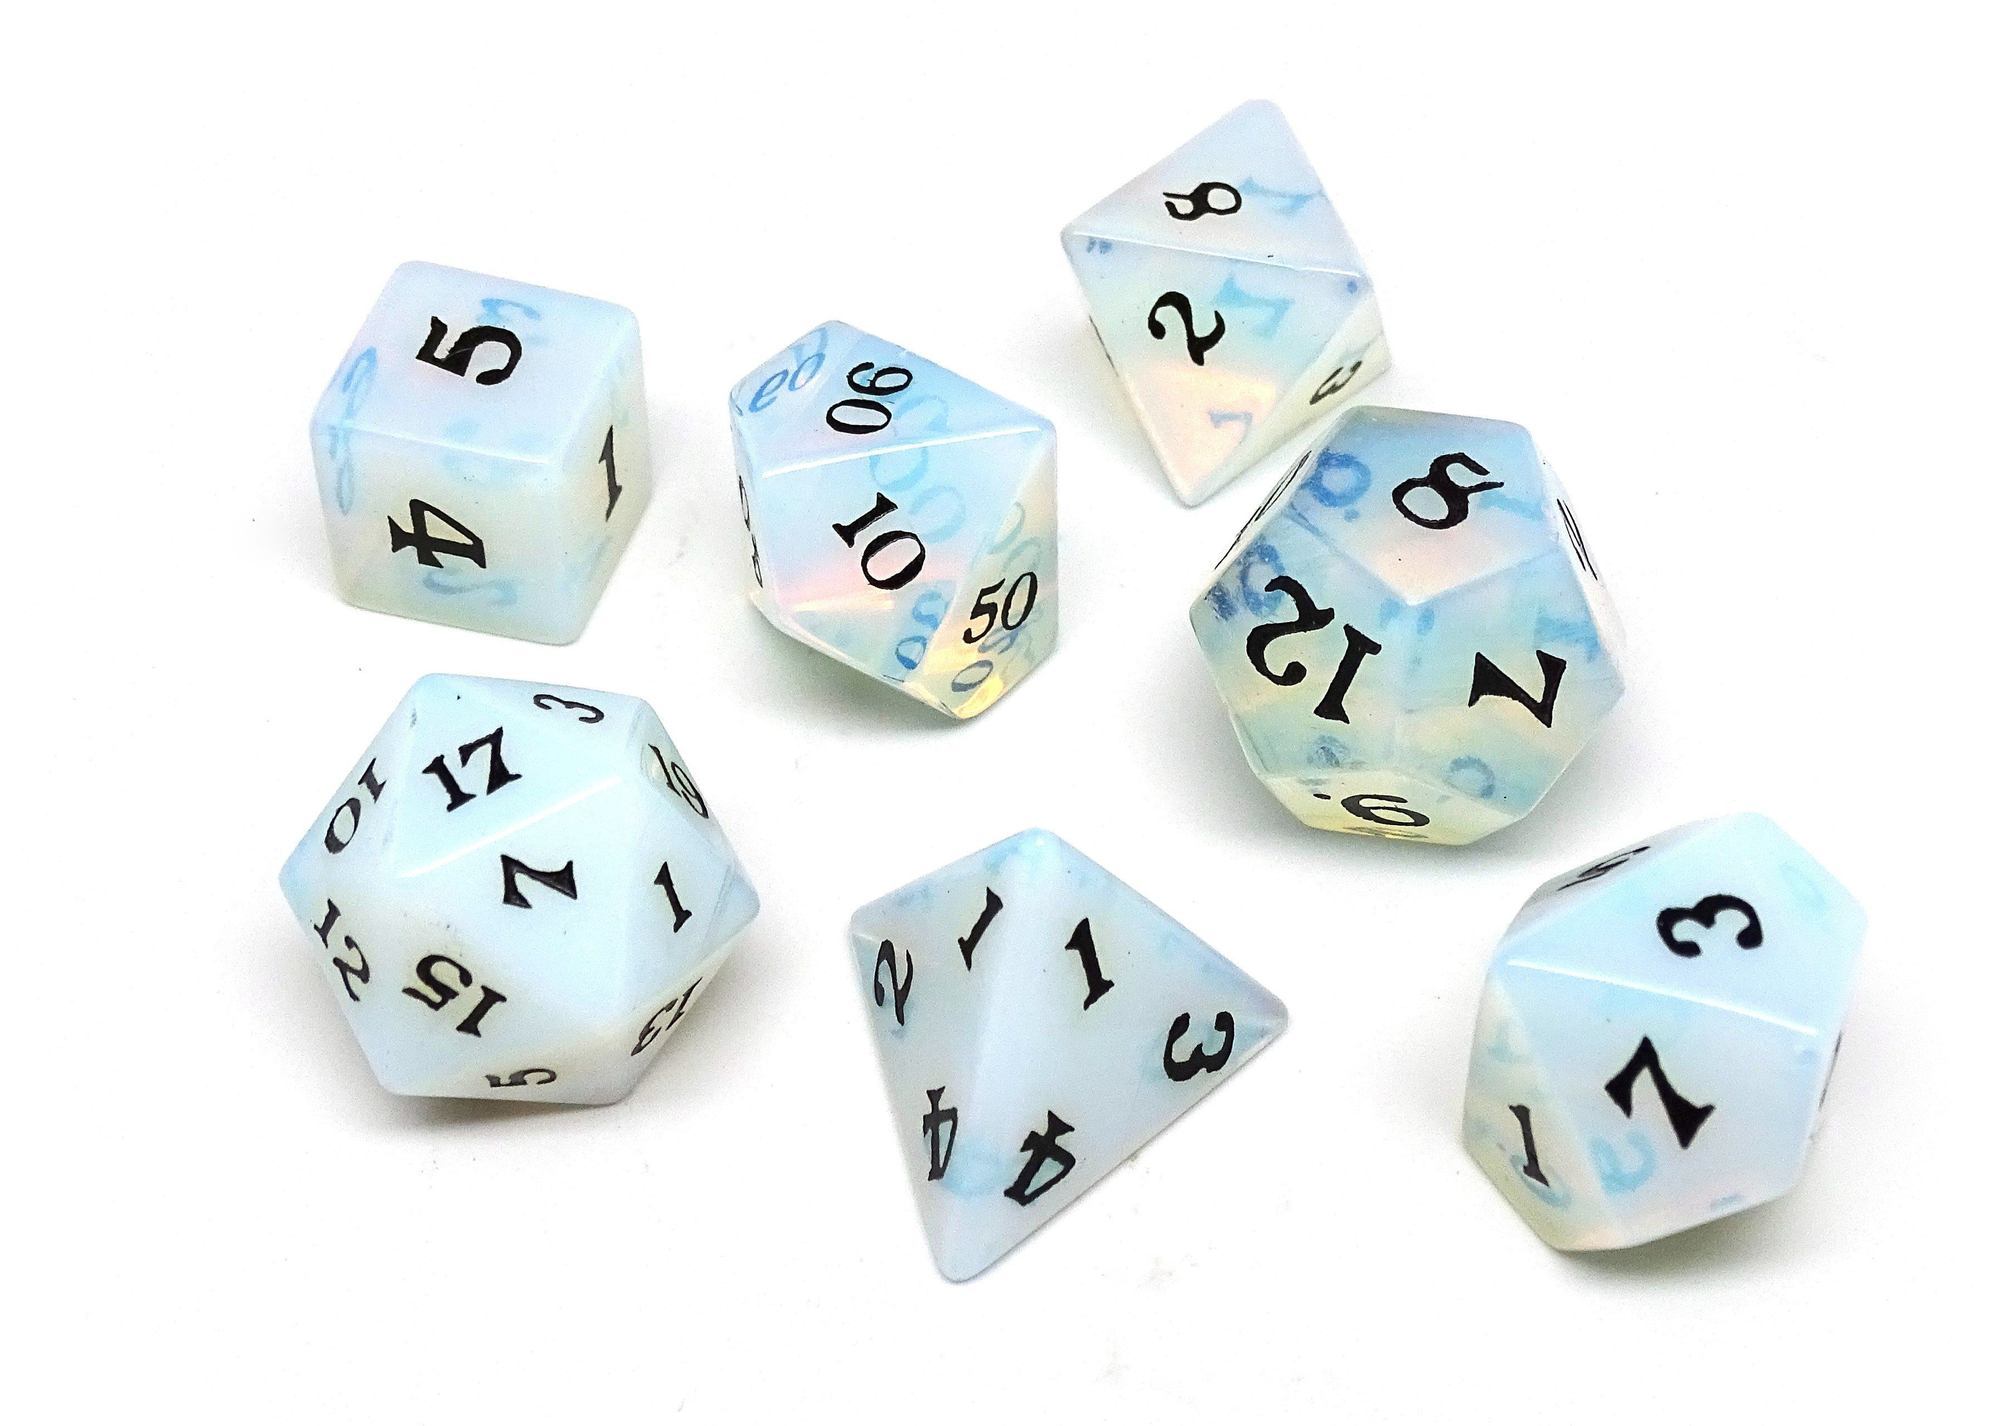 Dice Gifts For Any Occasion!